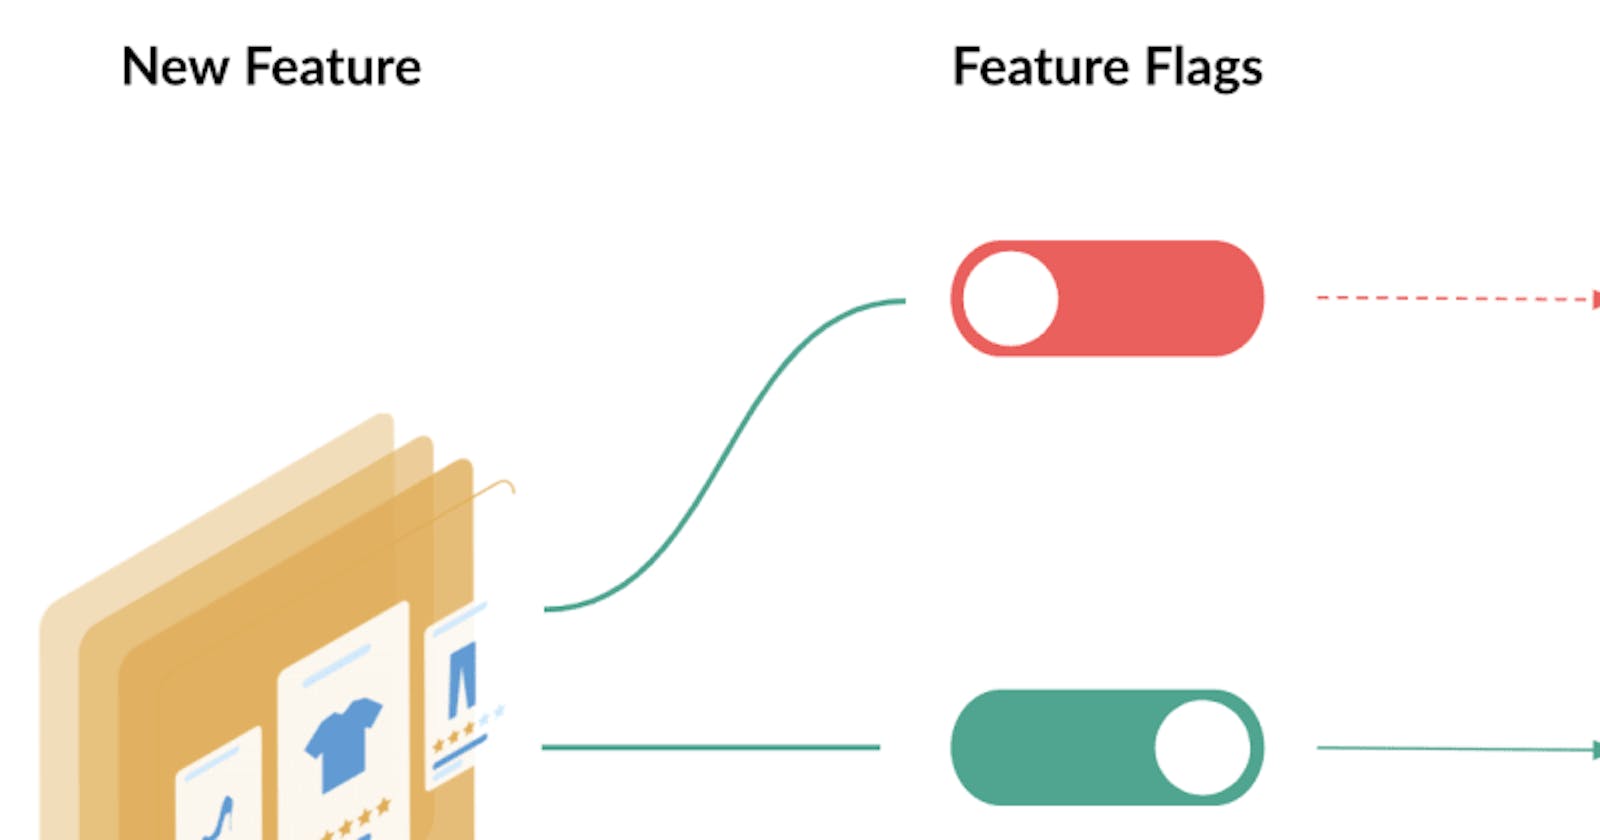 Using Feature Flags aka Feature Toggles in Microservices and DevOps - AWS/Azure or On-Prem